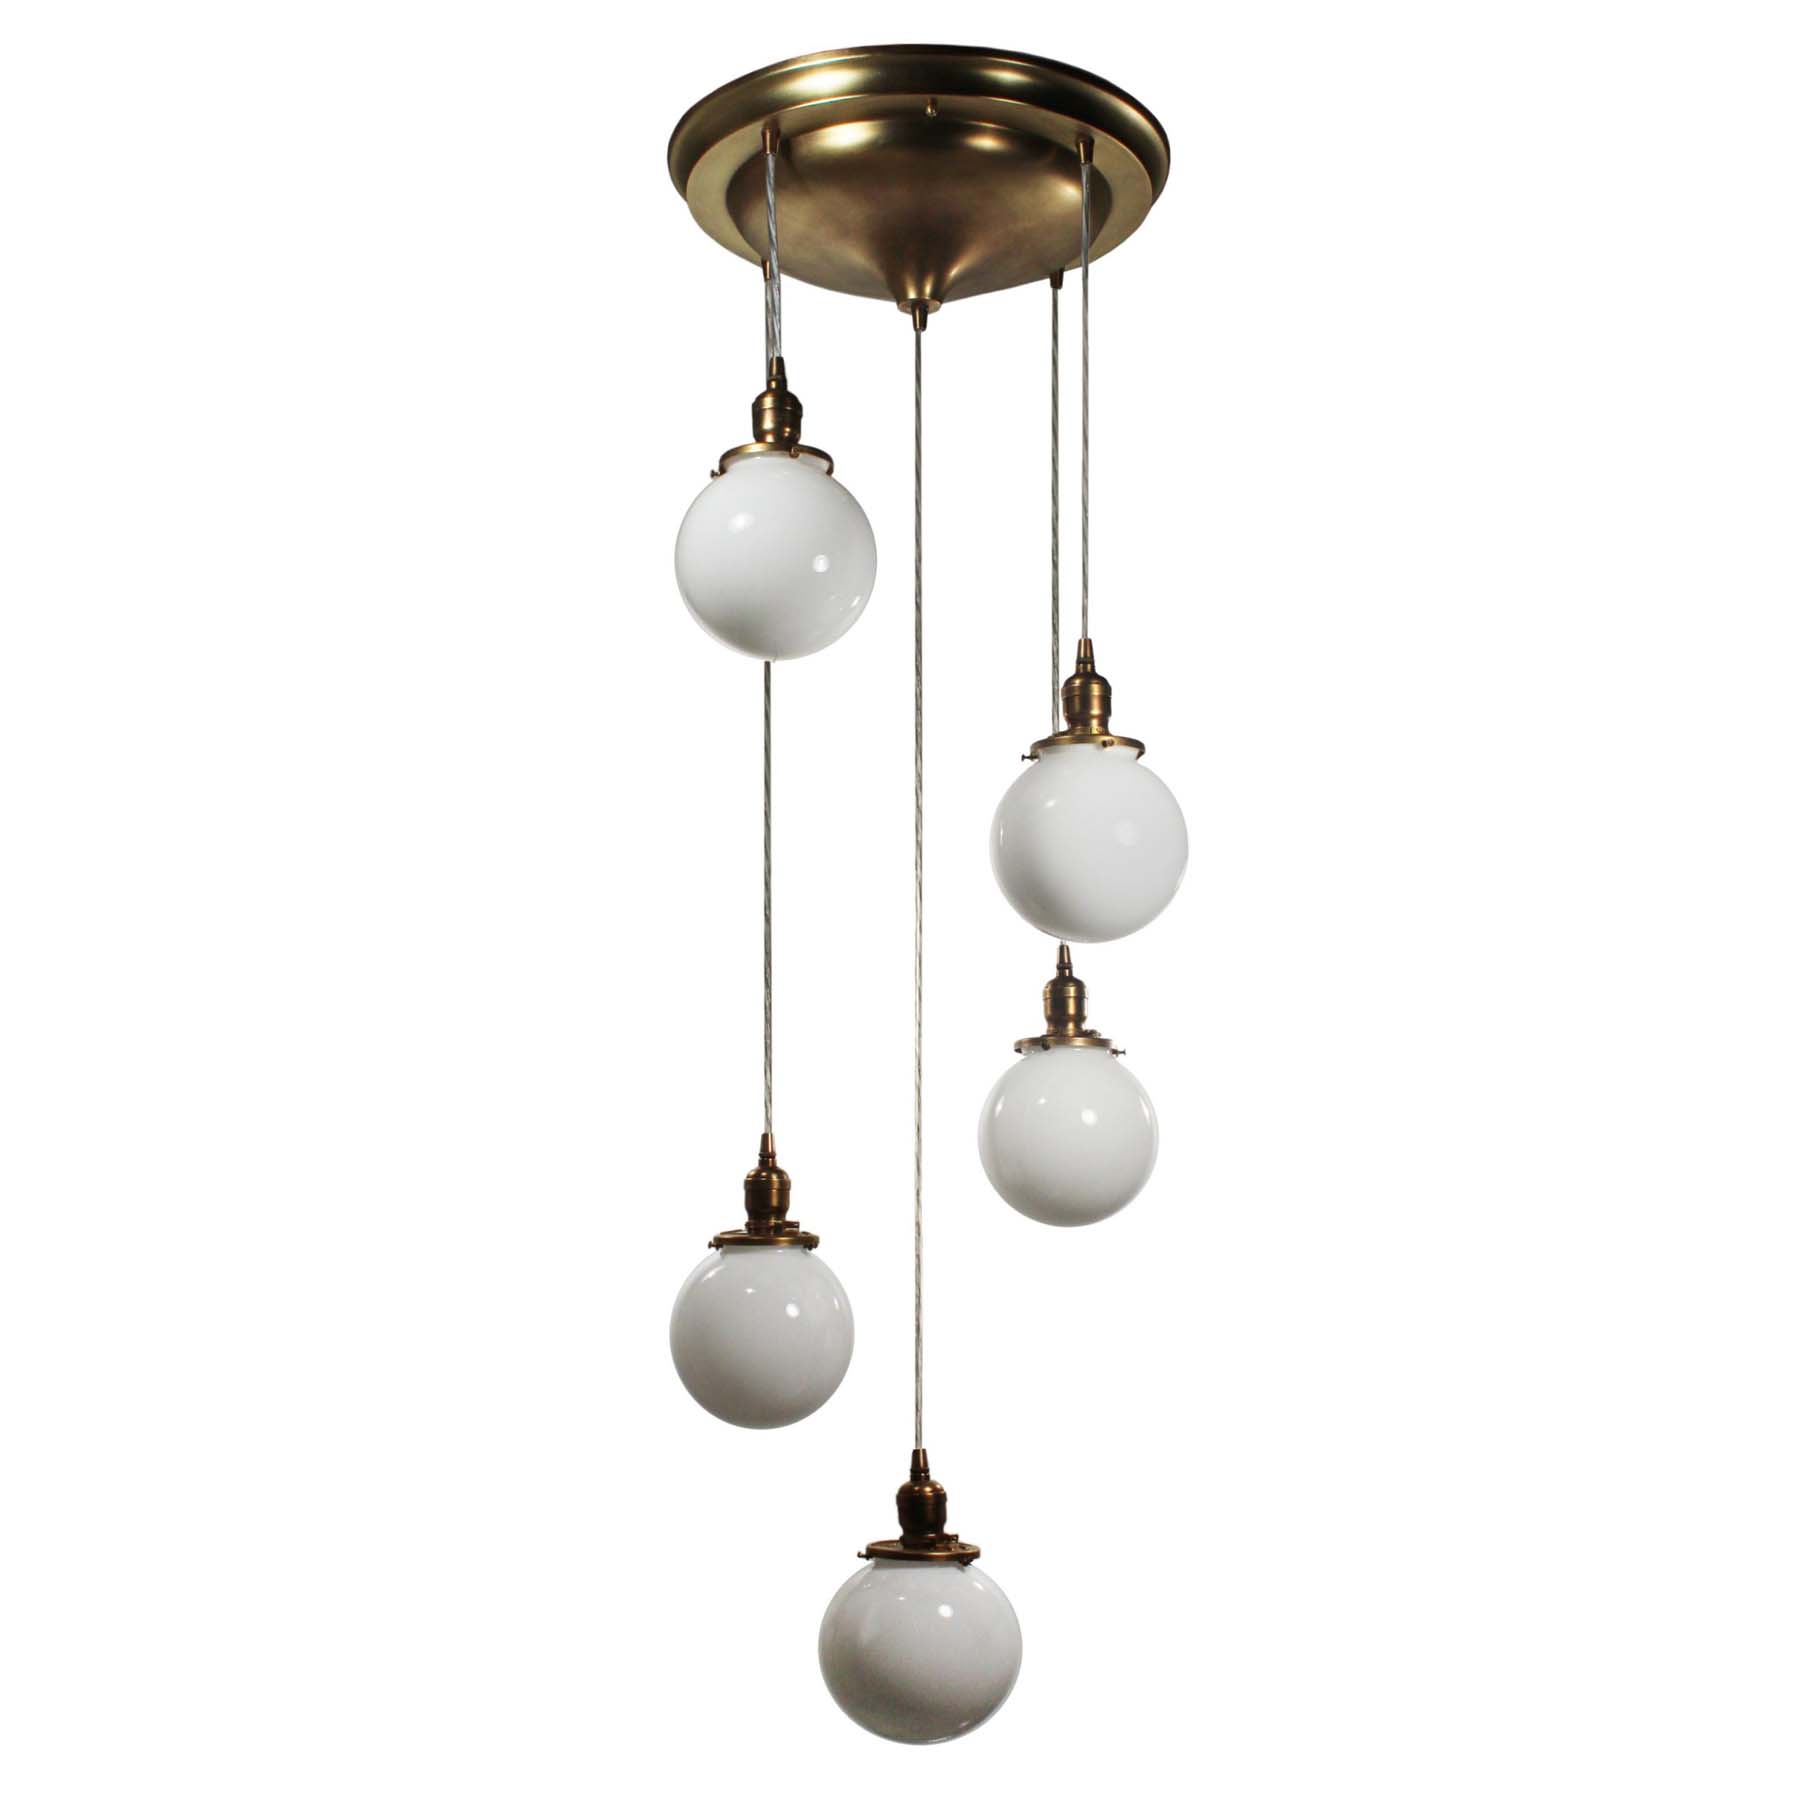 SOLD Antique Semi Flush-Mount Chandelier with Ball Shades-66889